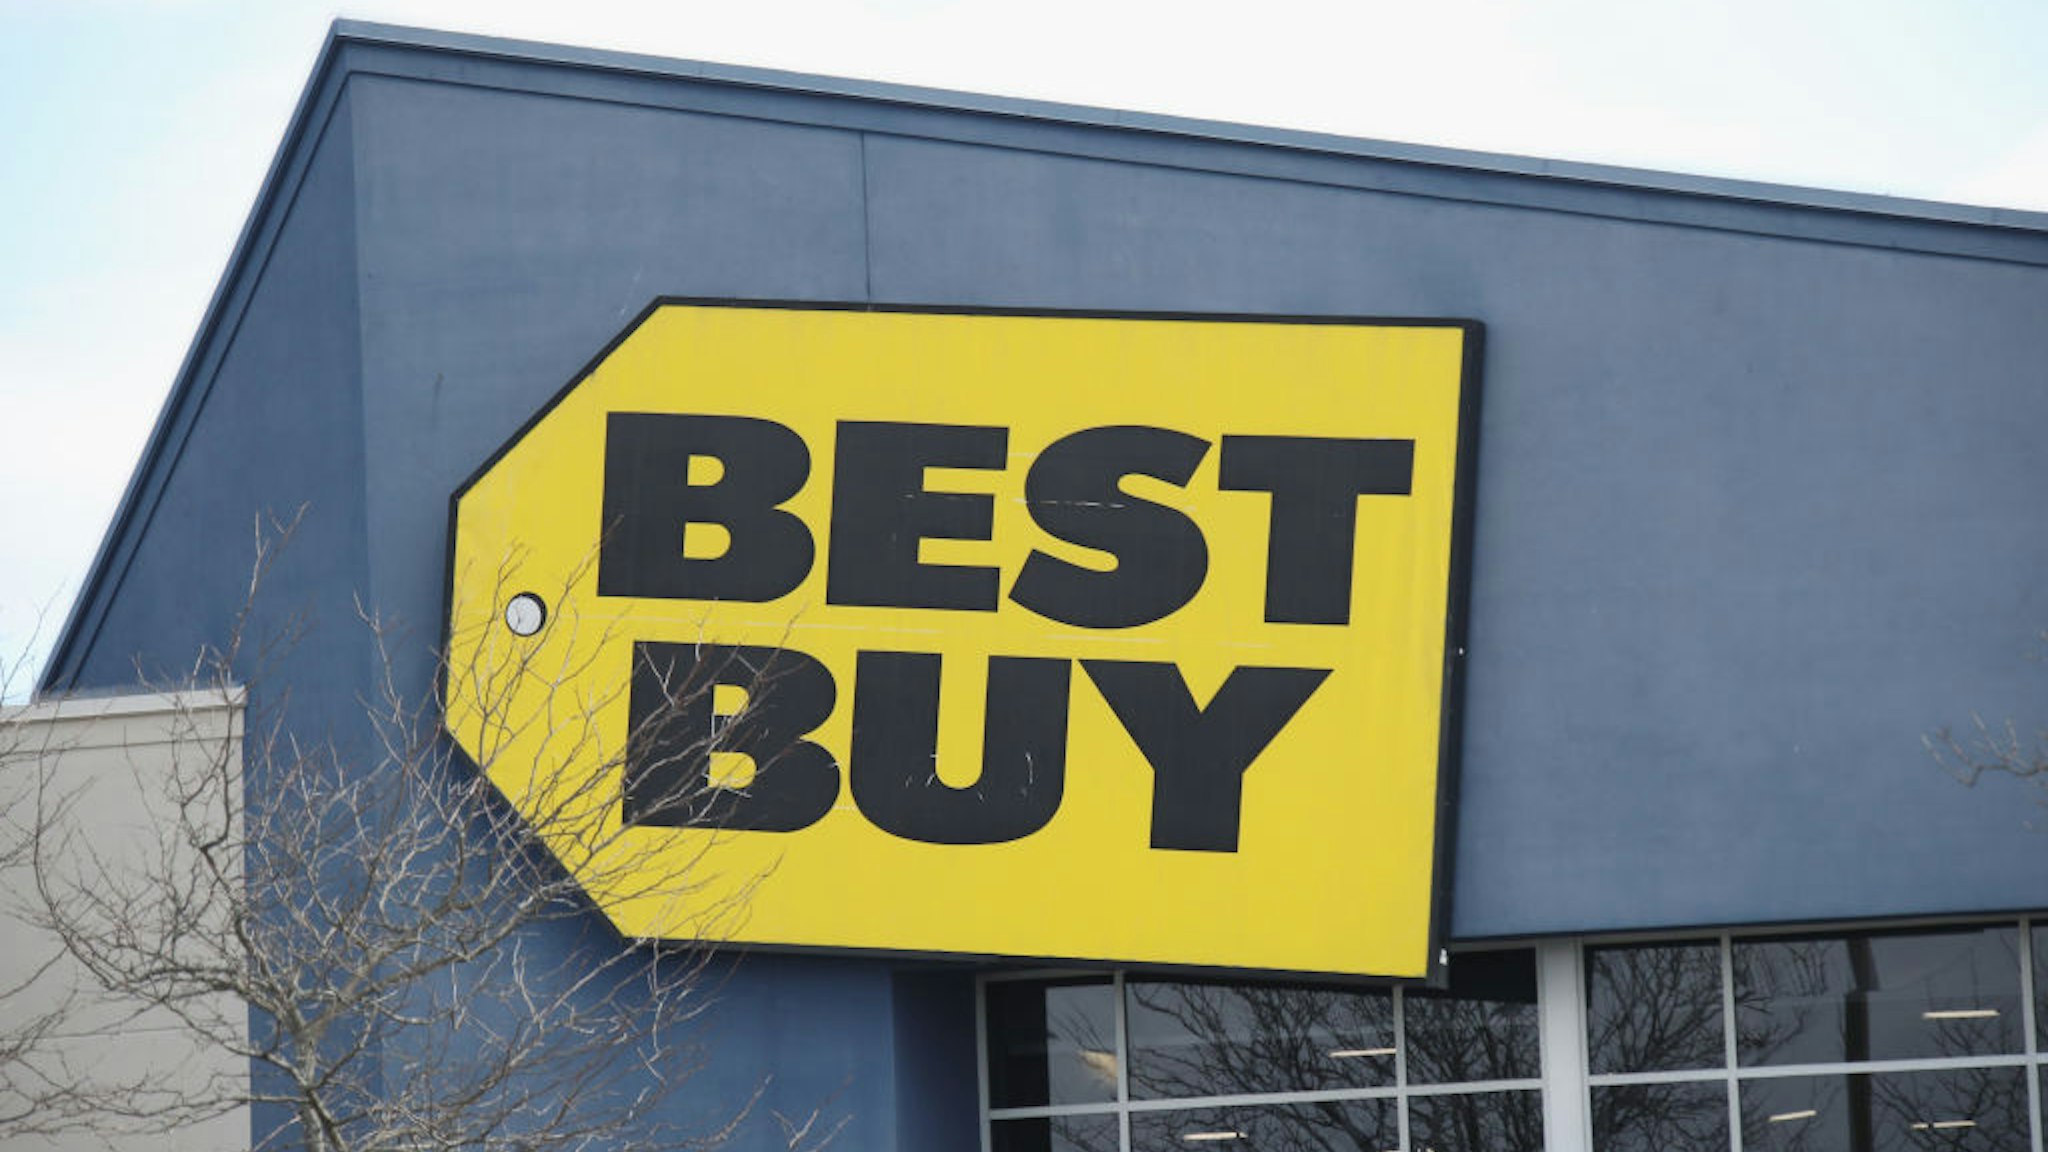 LEVITTOWN, NEW YORK - MARCH 16: An image of the sign for Best Buy as photographed on March 16, 2020 in Levittown, New York. (Photo by Bruce Bennett/Getty Images)